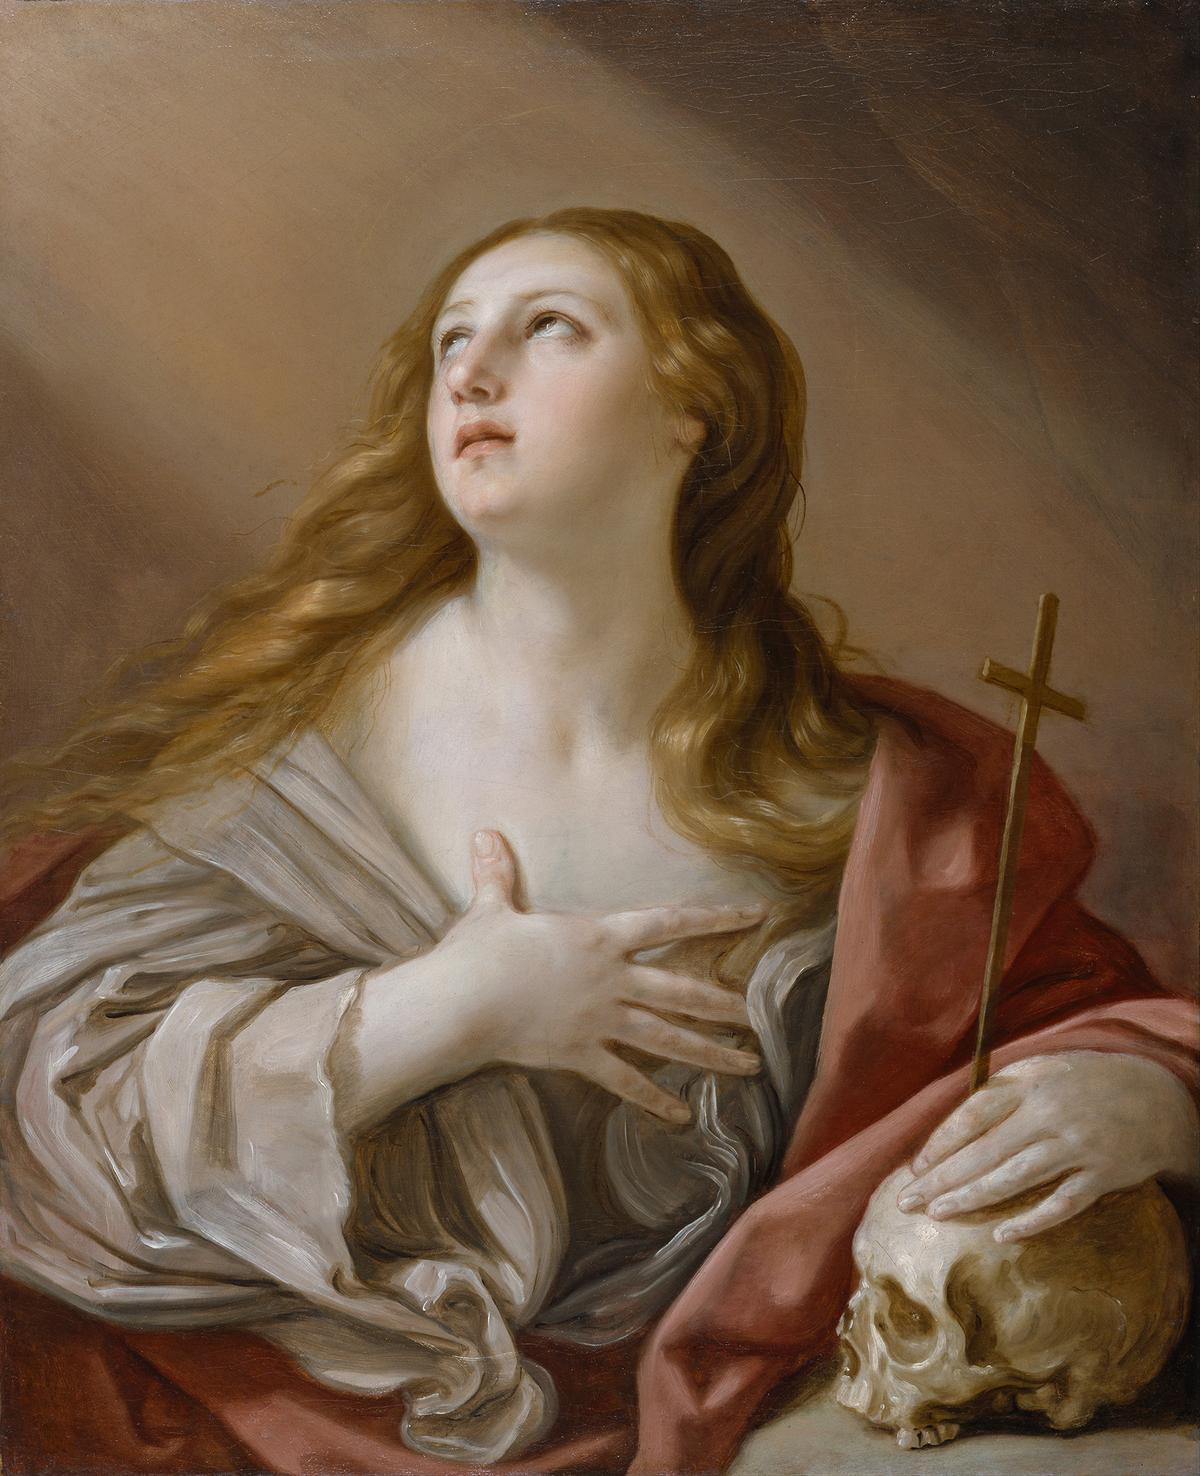 At the root of ancient wisdom is the curtailment of our appetites. “The Penitent Magdalene,” circa 1635, by Guido Reni. Oil on canvas. Walters Art Museum, Mount Vernon Belvedere, Baltimore, Maryland. (Public Domain)